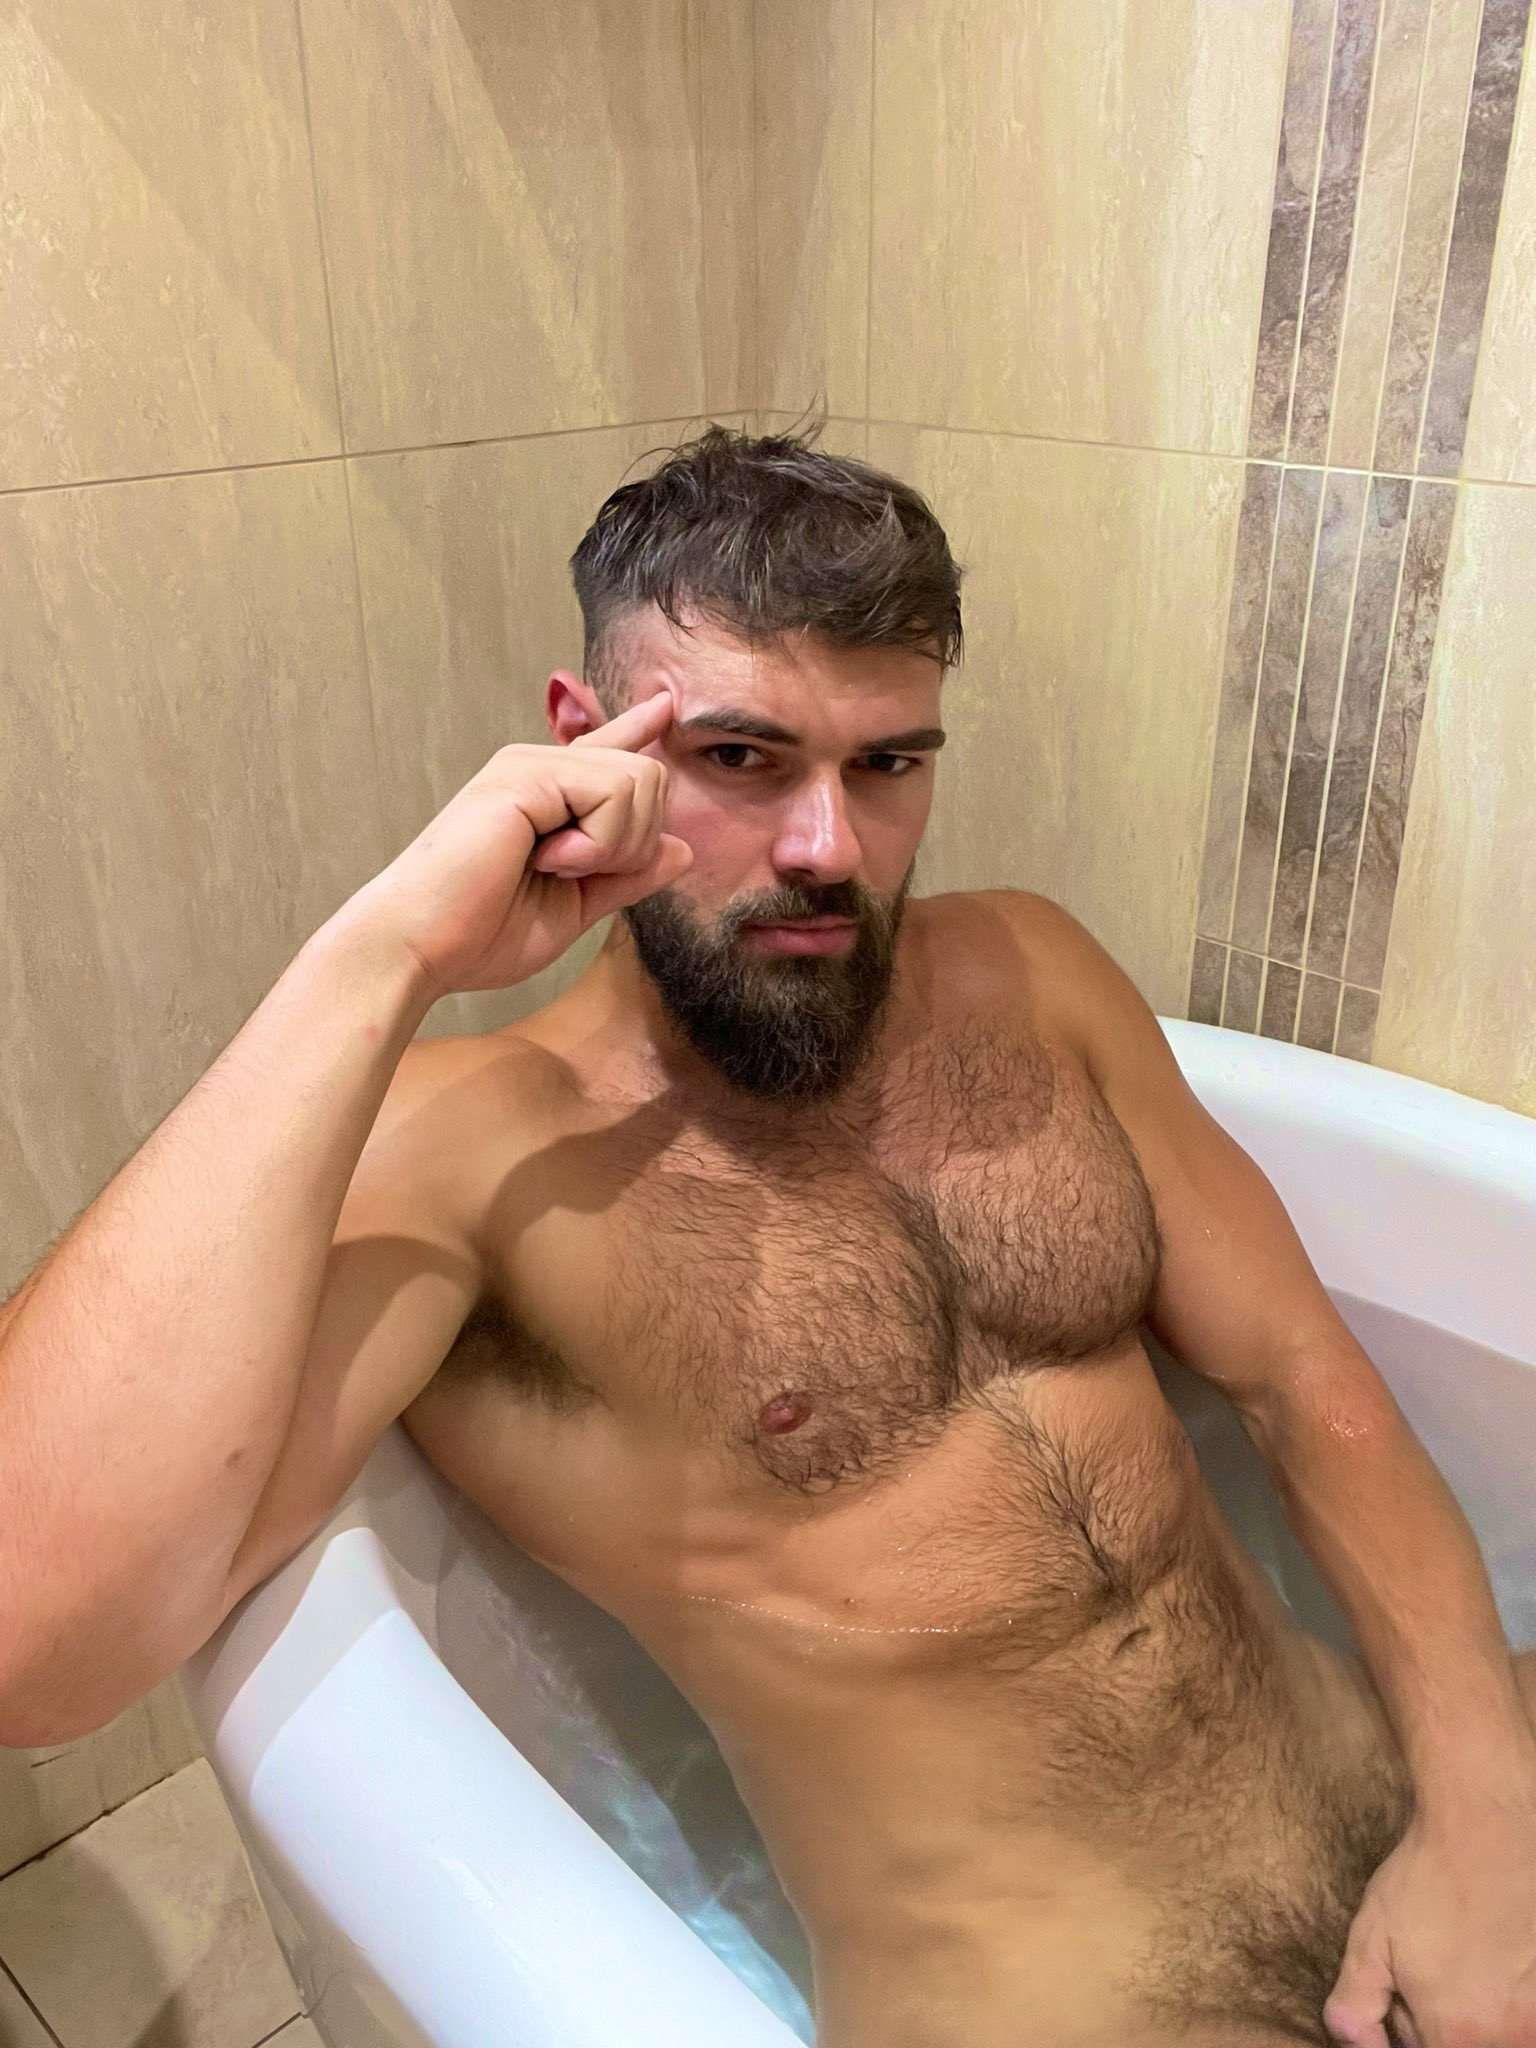 Watch the Photo by Ultra-Masculine-XXX with the username @Ultra-Masculine-XXX, posted on December 4, 2023. The post is about the topic Gay Hairy Men. and the text says 'Chris Bayton a.k.a. AlphaBayton #ChrisBayton #AlphaBayton #hairy #muscle #hunk #beard'